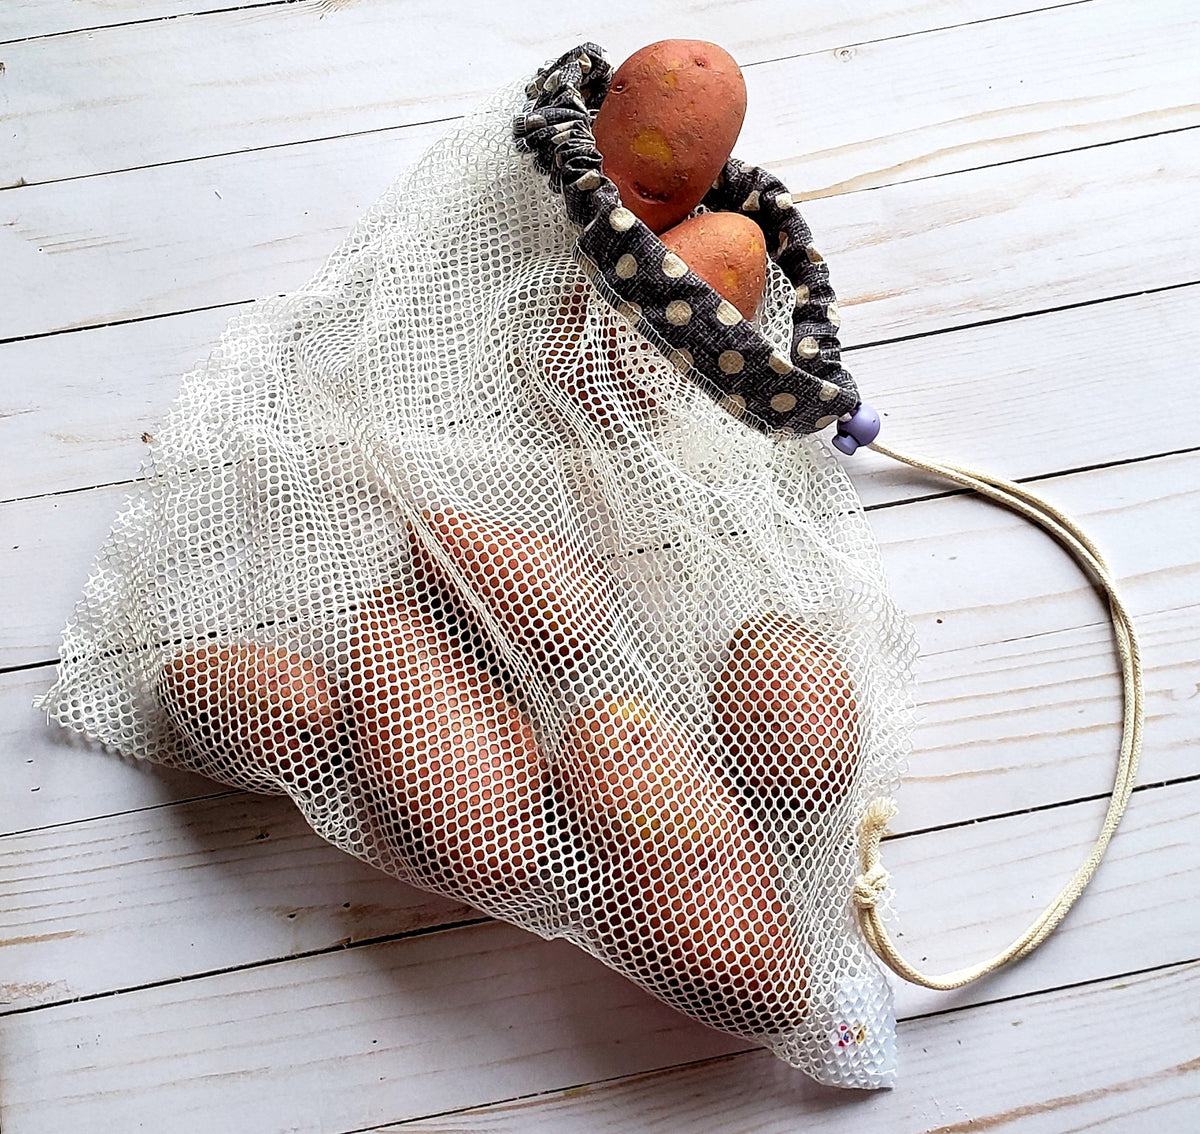 Produce/Laundry Cotton Mesh Bag - Perfect Carryall! – Ks Got You Covered